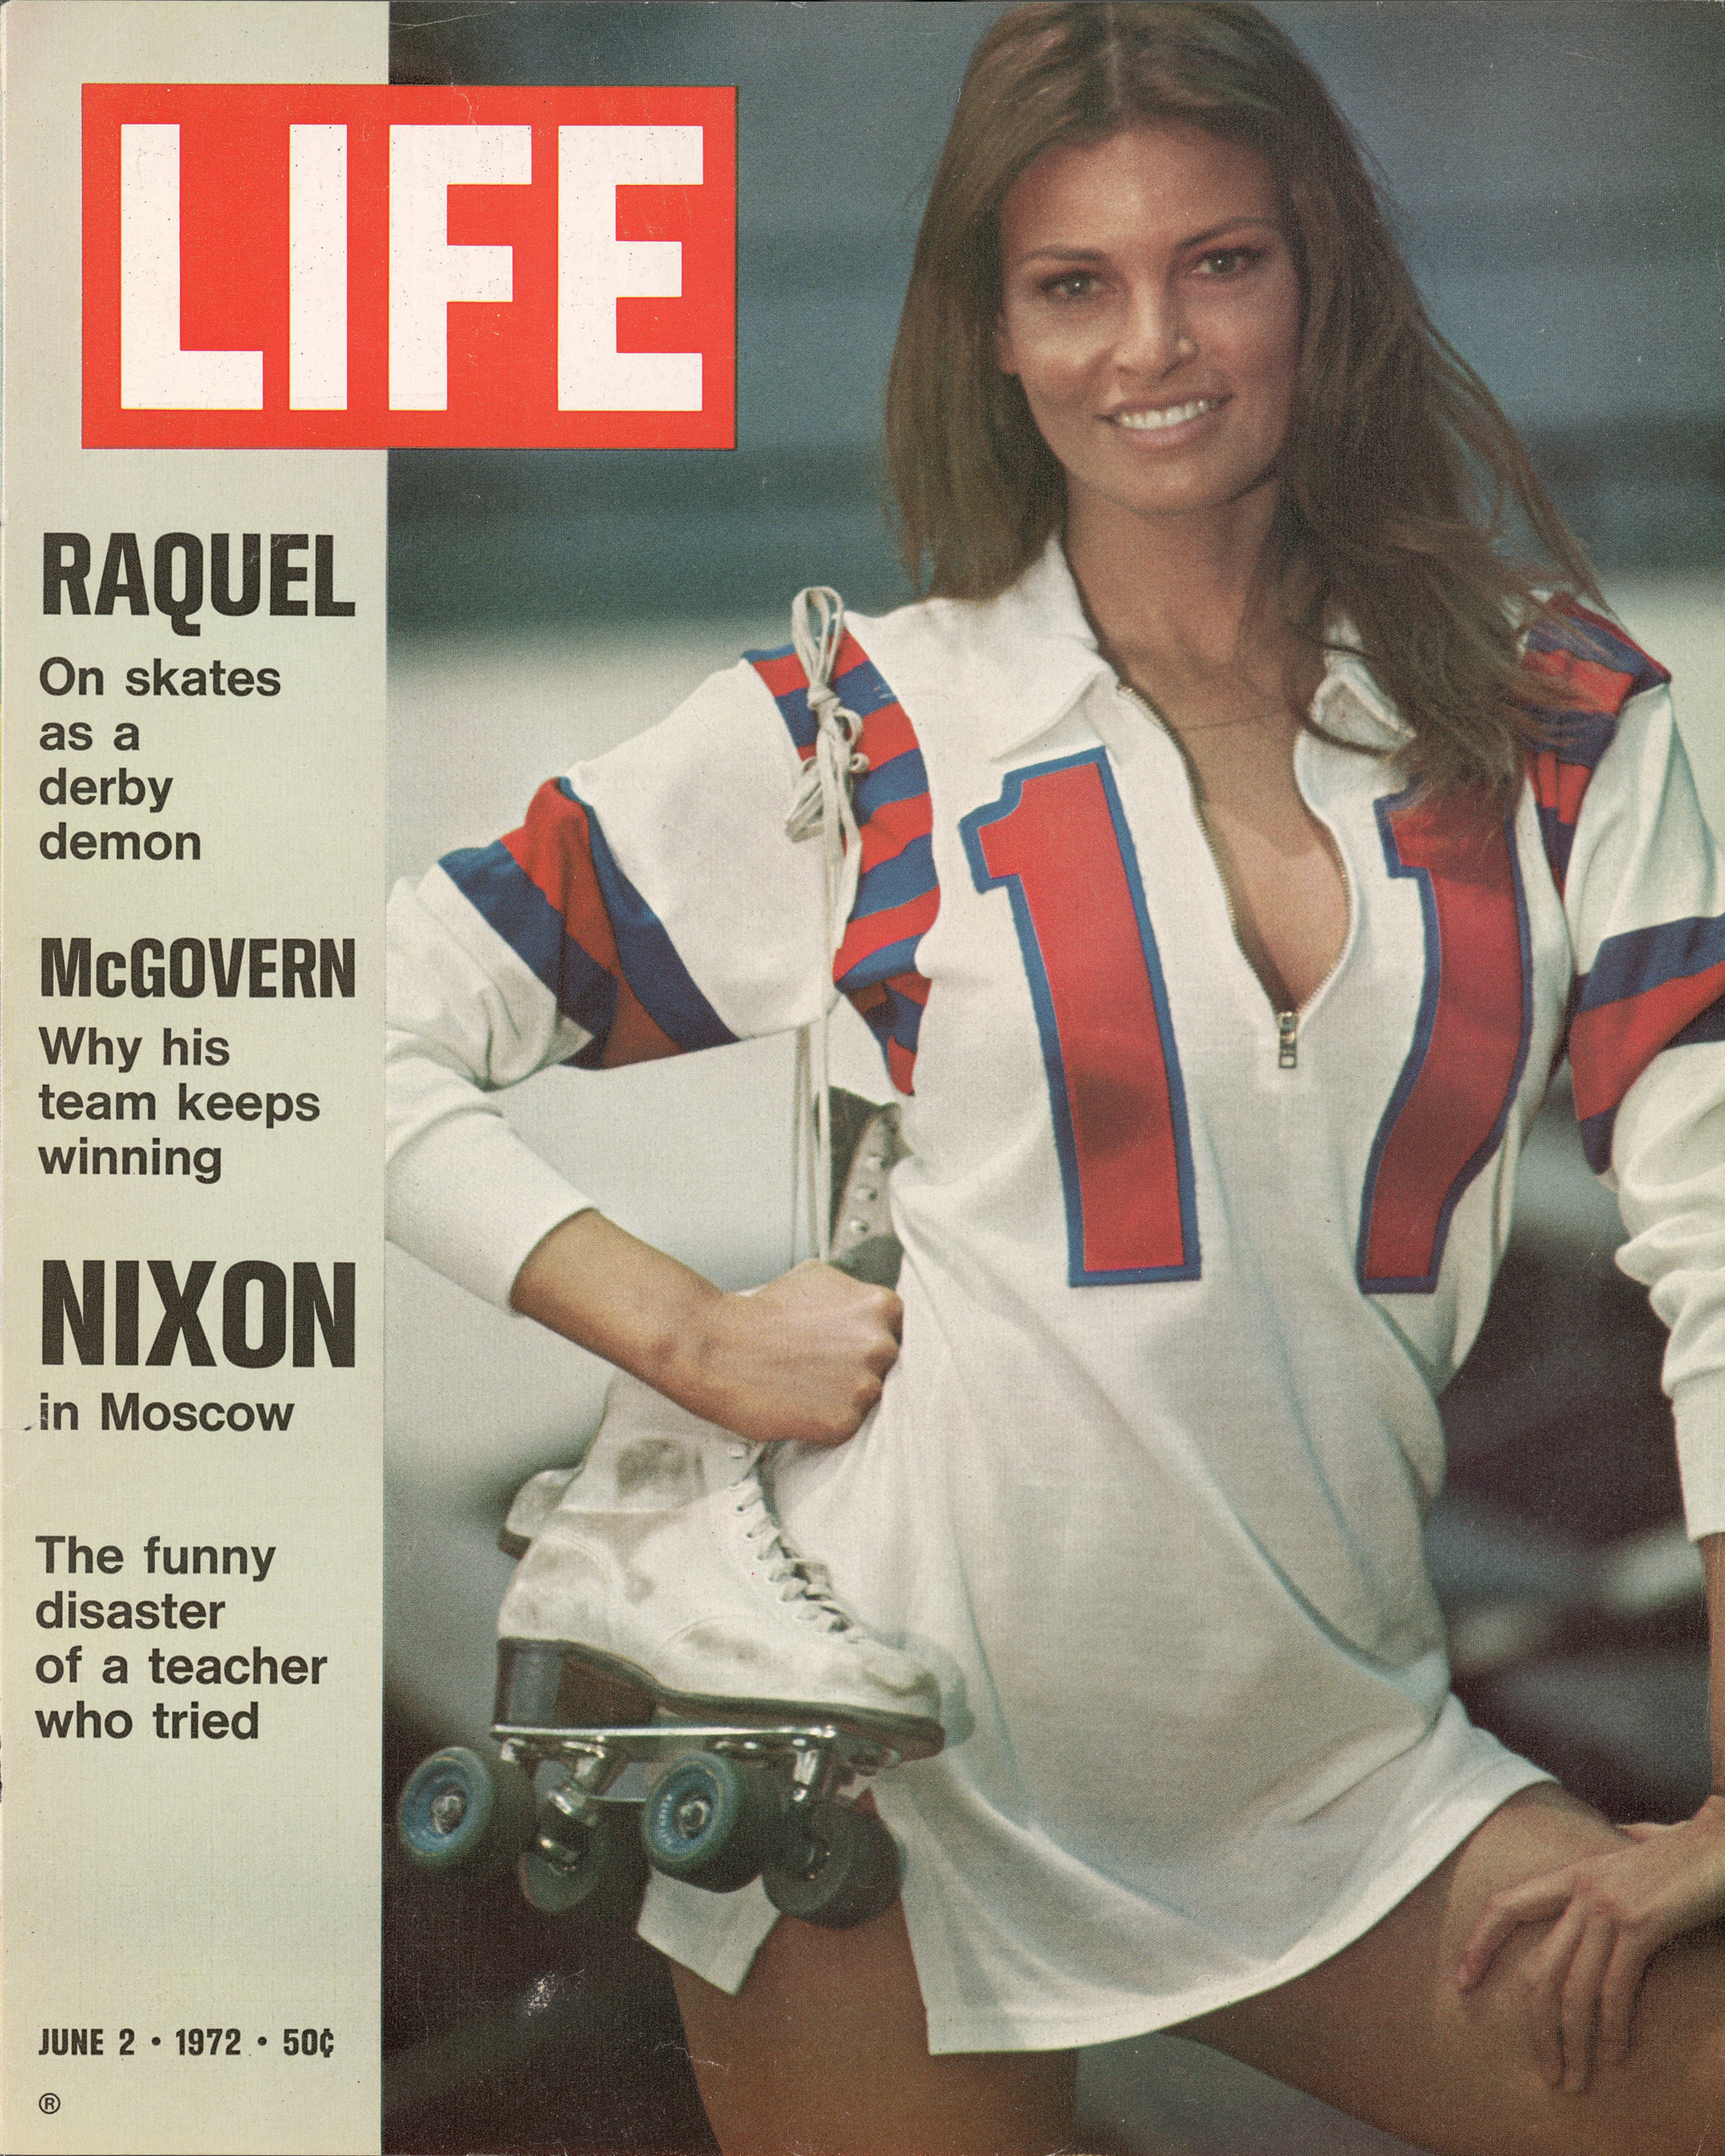 June 2, 1972 cover of LIFE magazine.